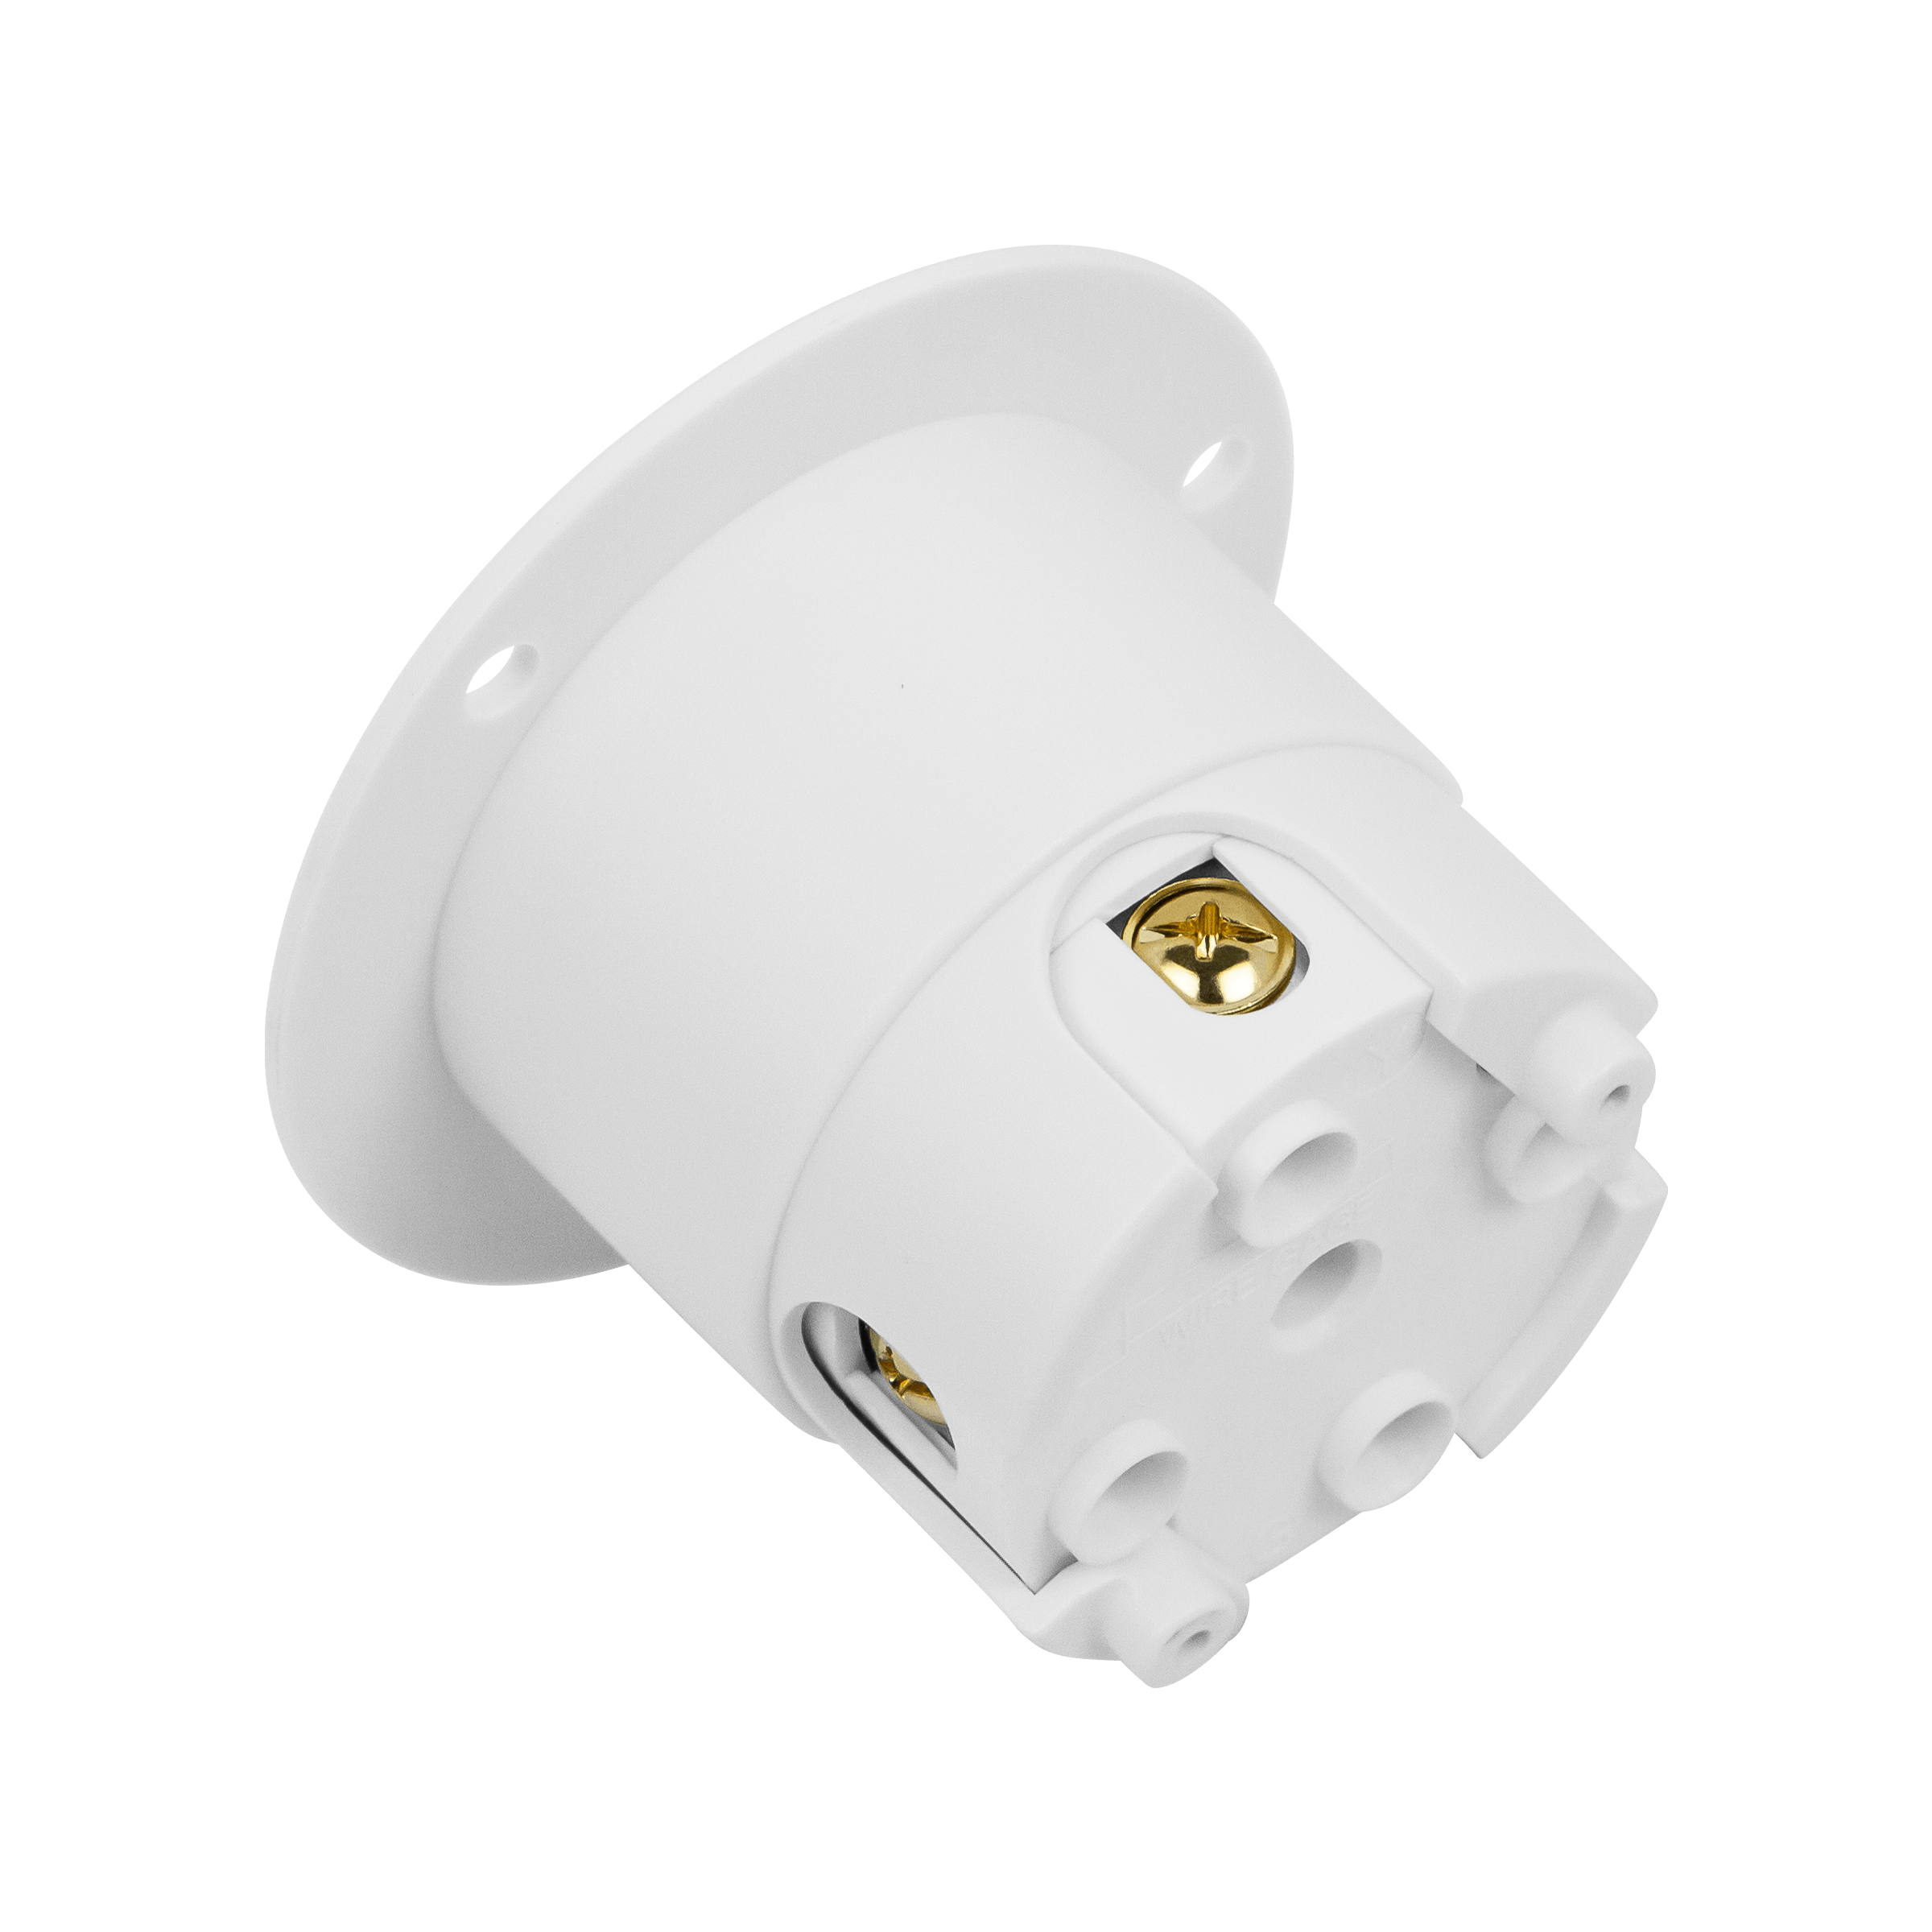 NEMA L15-30 Flanged Outlet Locking Plug Charger Receptacle 30 Amp White